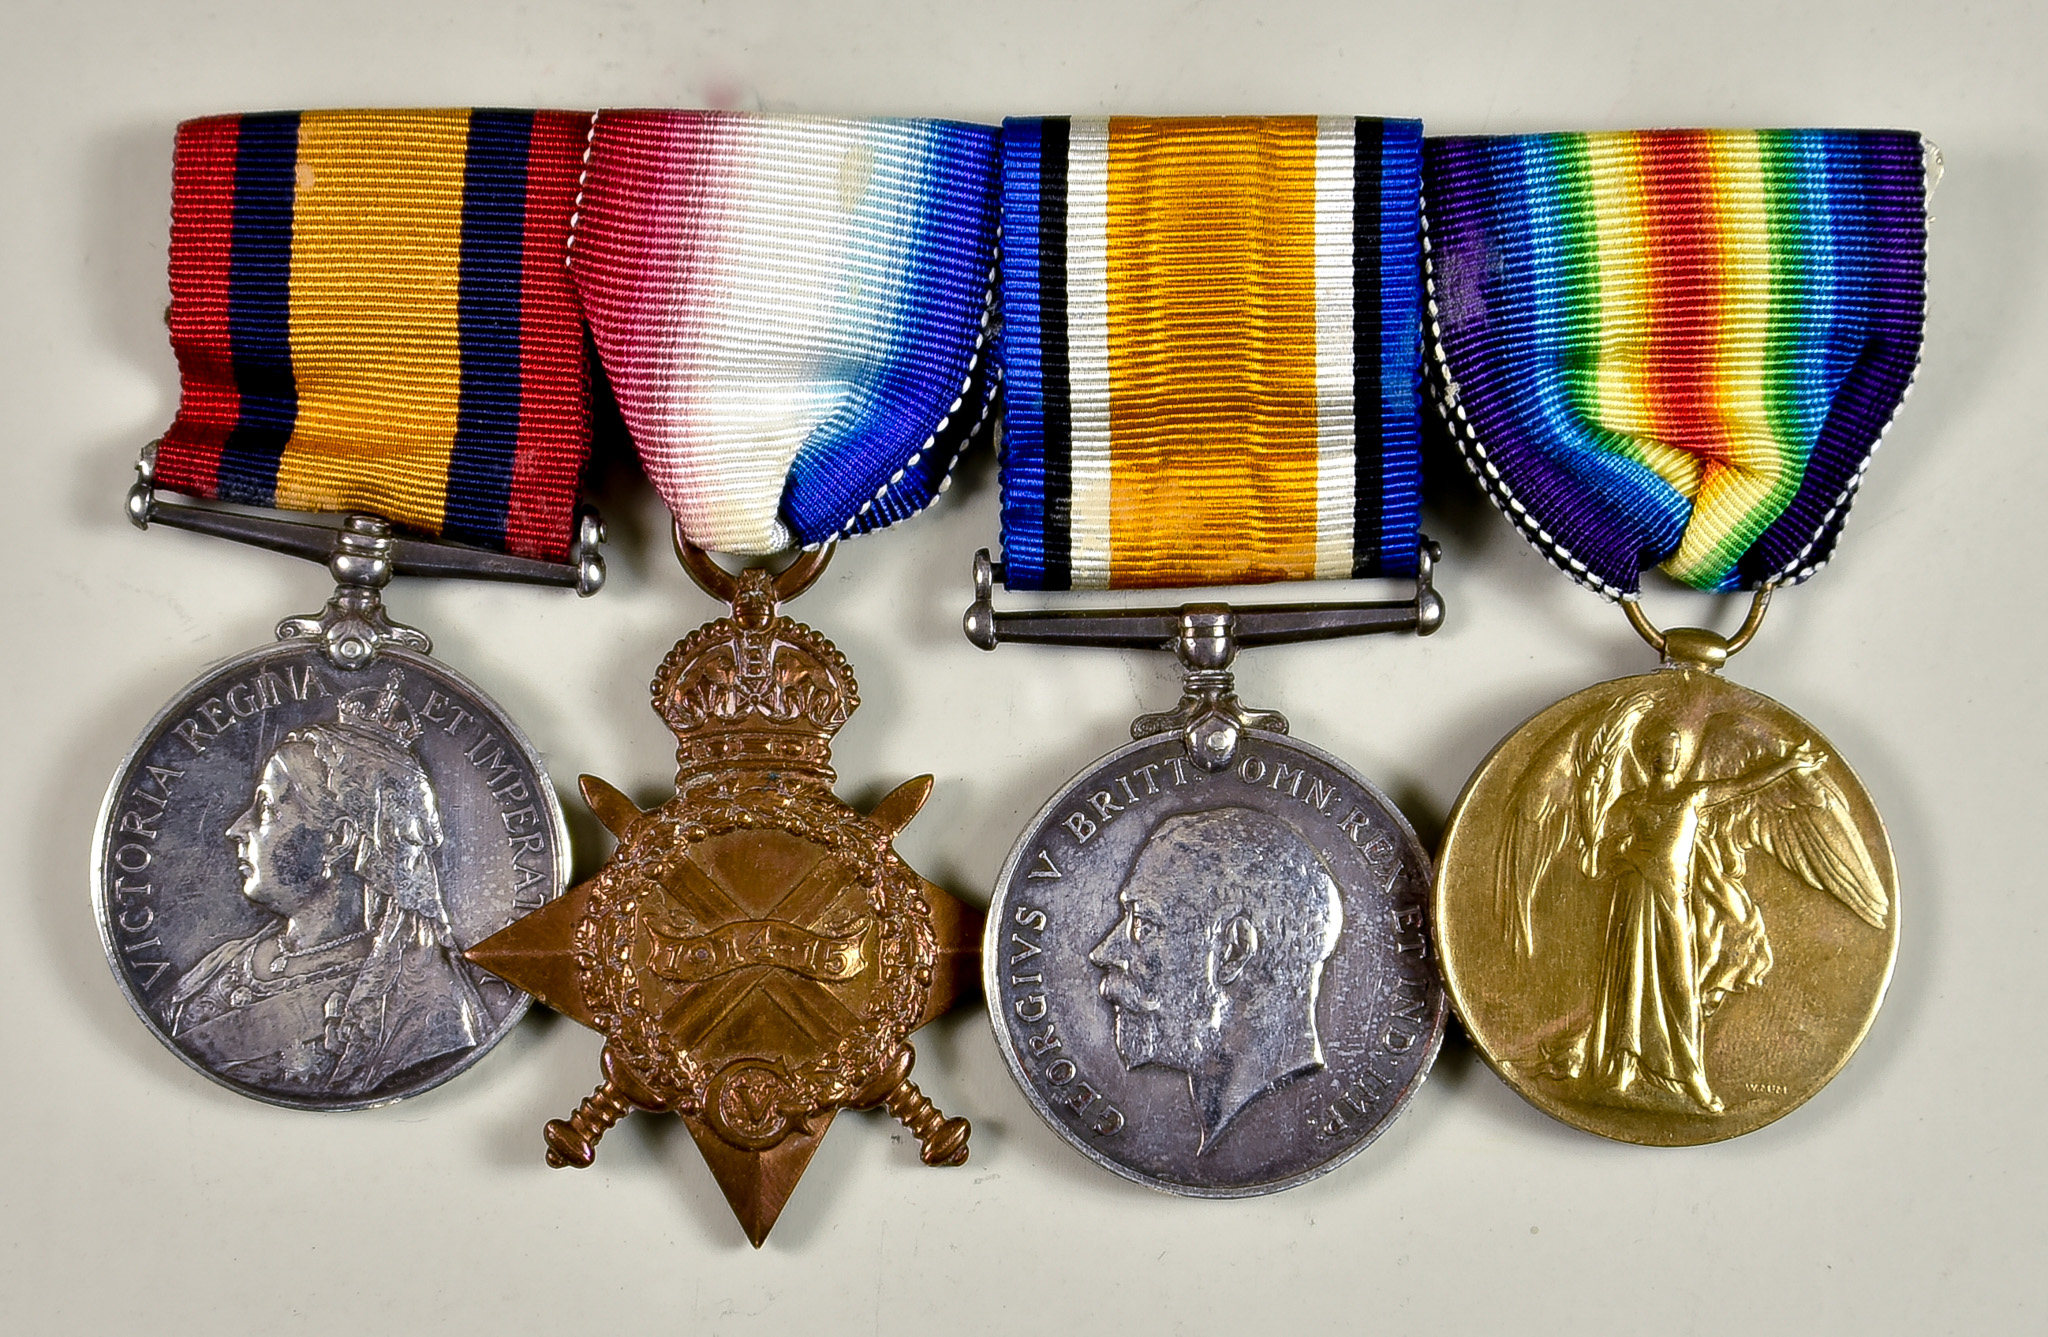 A Queen's Mediterranean Medal, Boer War, 1899-1902, to Pte. W. Seabrook and a group of three World